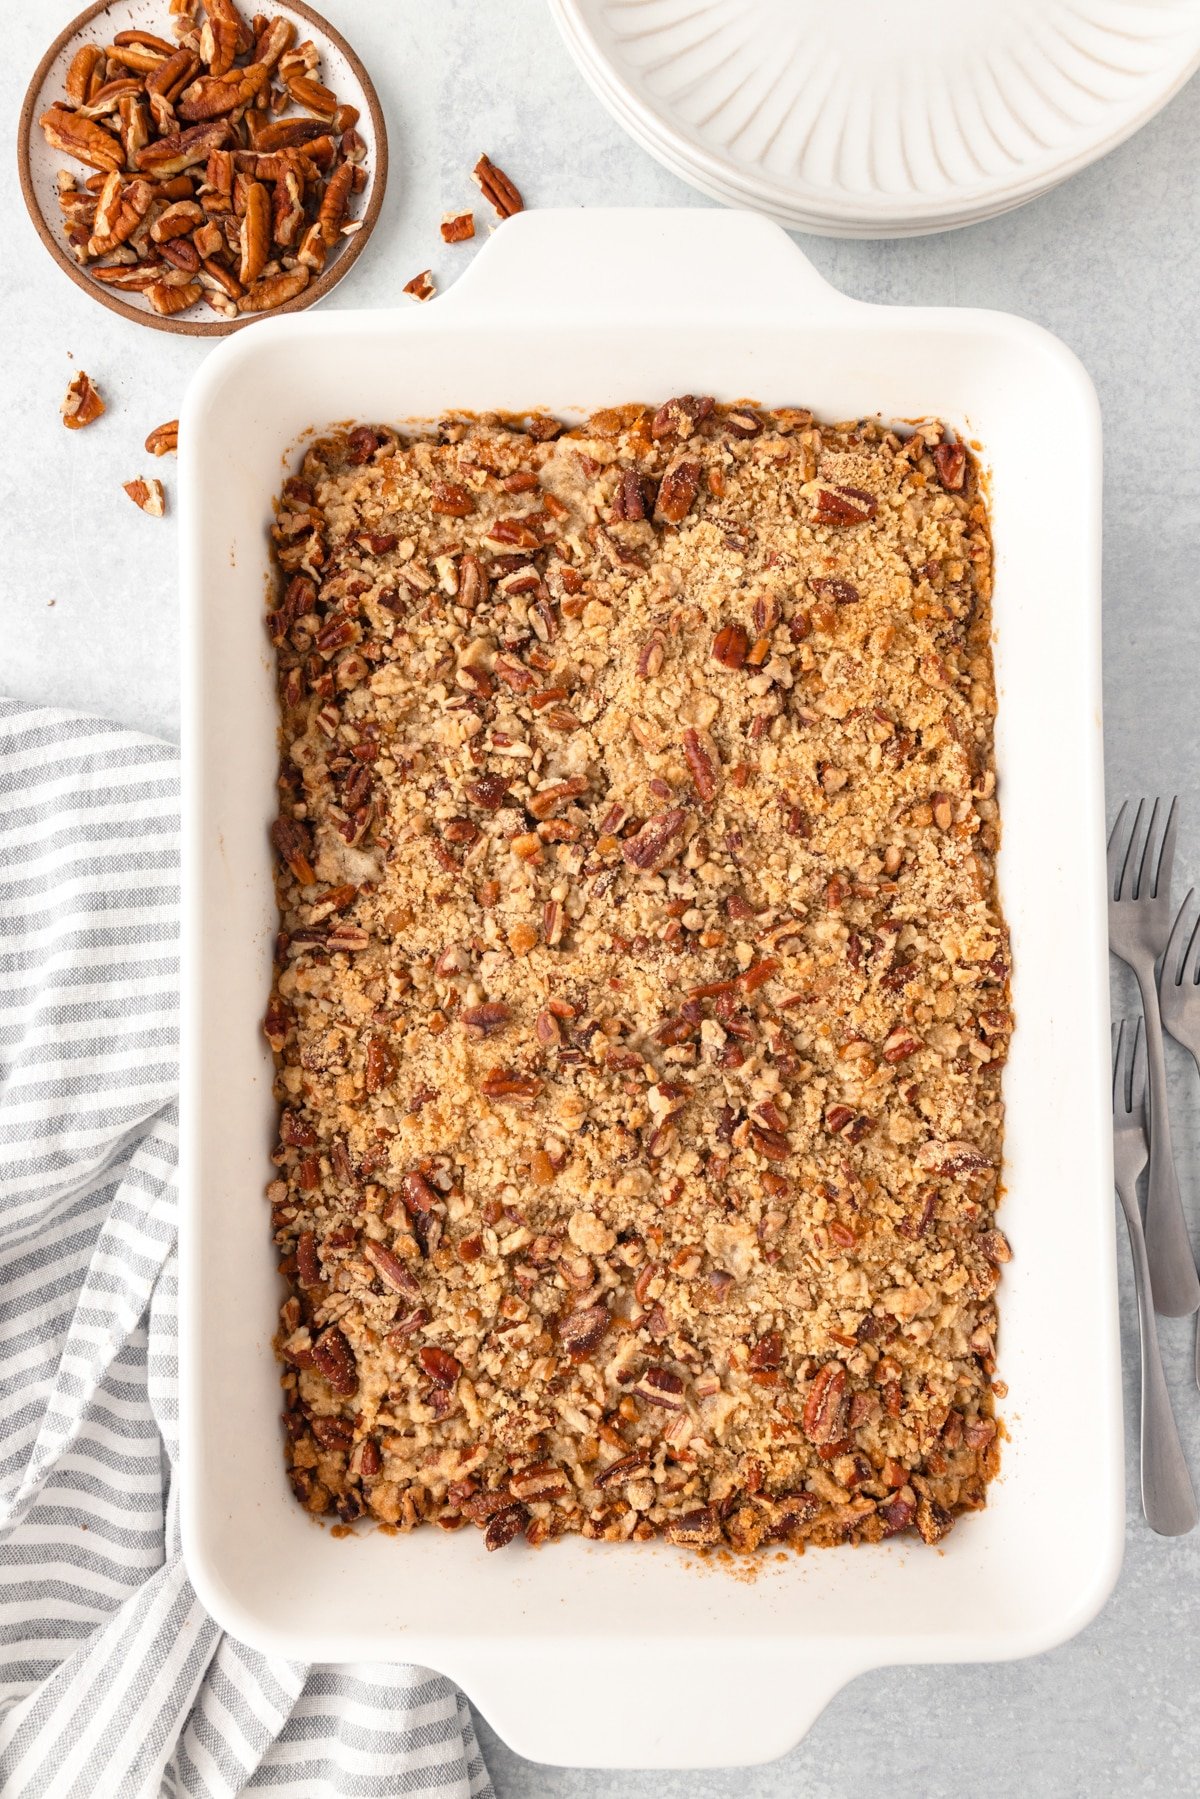 Sweet potato casserole in a large white baking dish, topped with pecans.